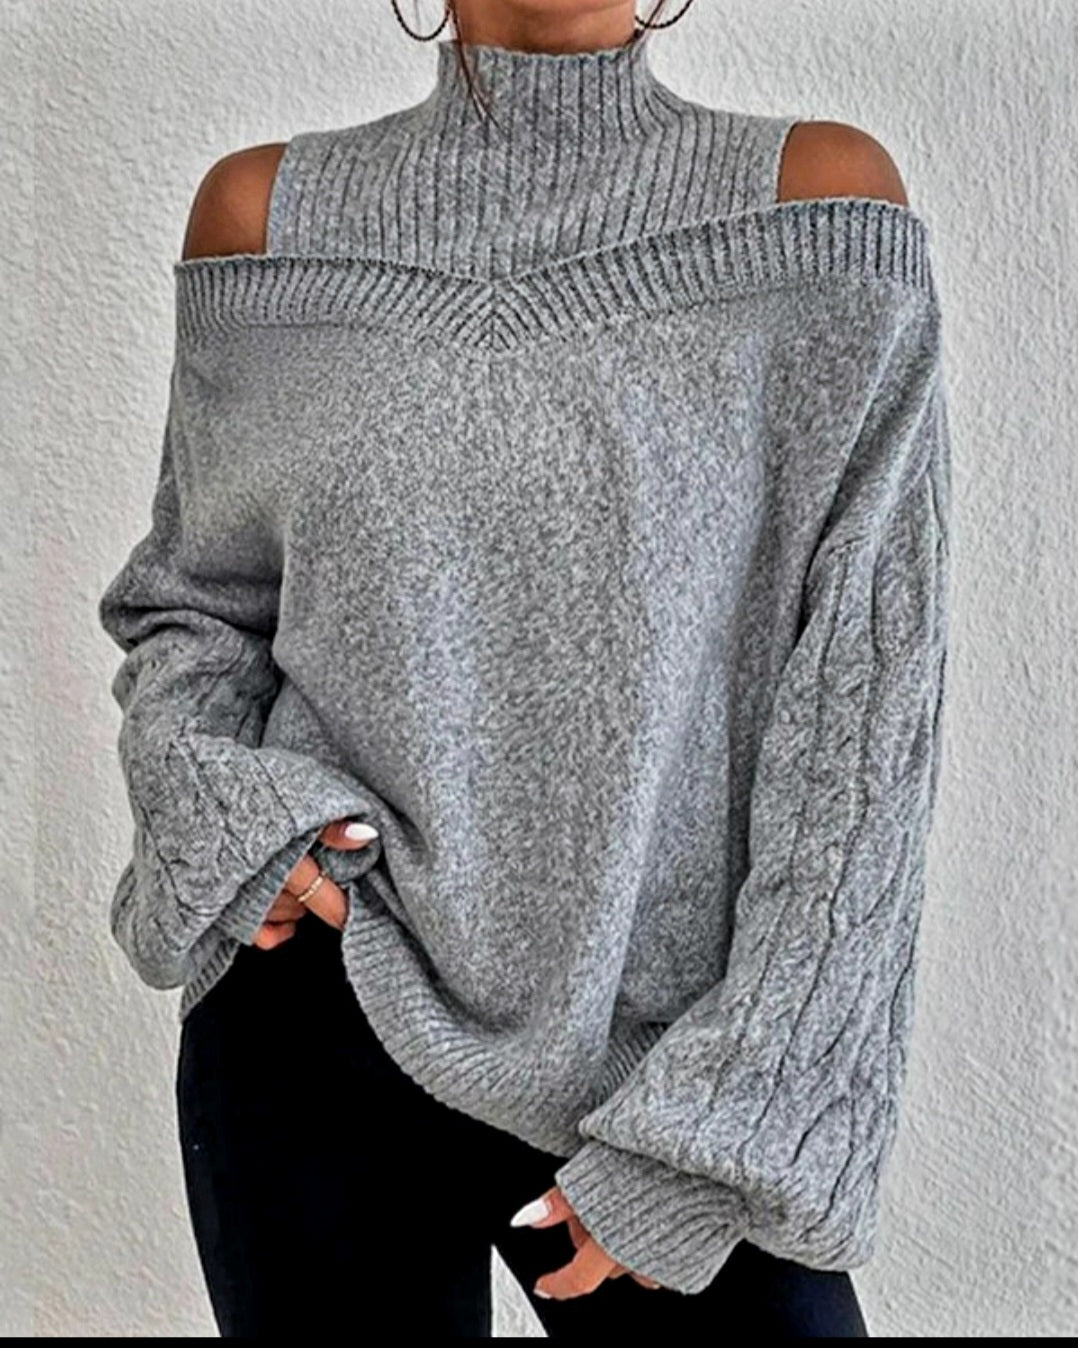 The Overcast Sweater